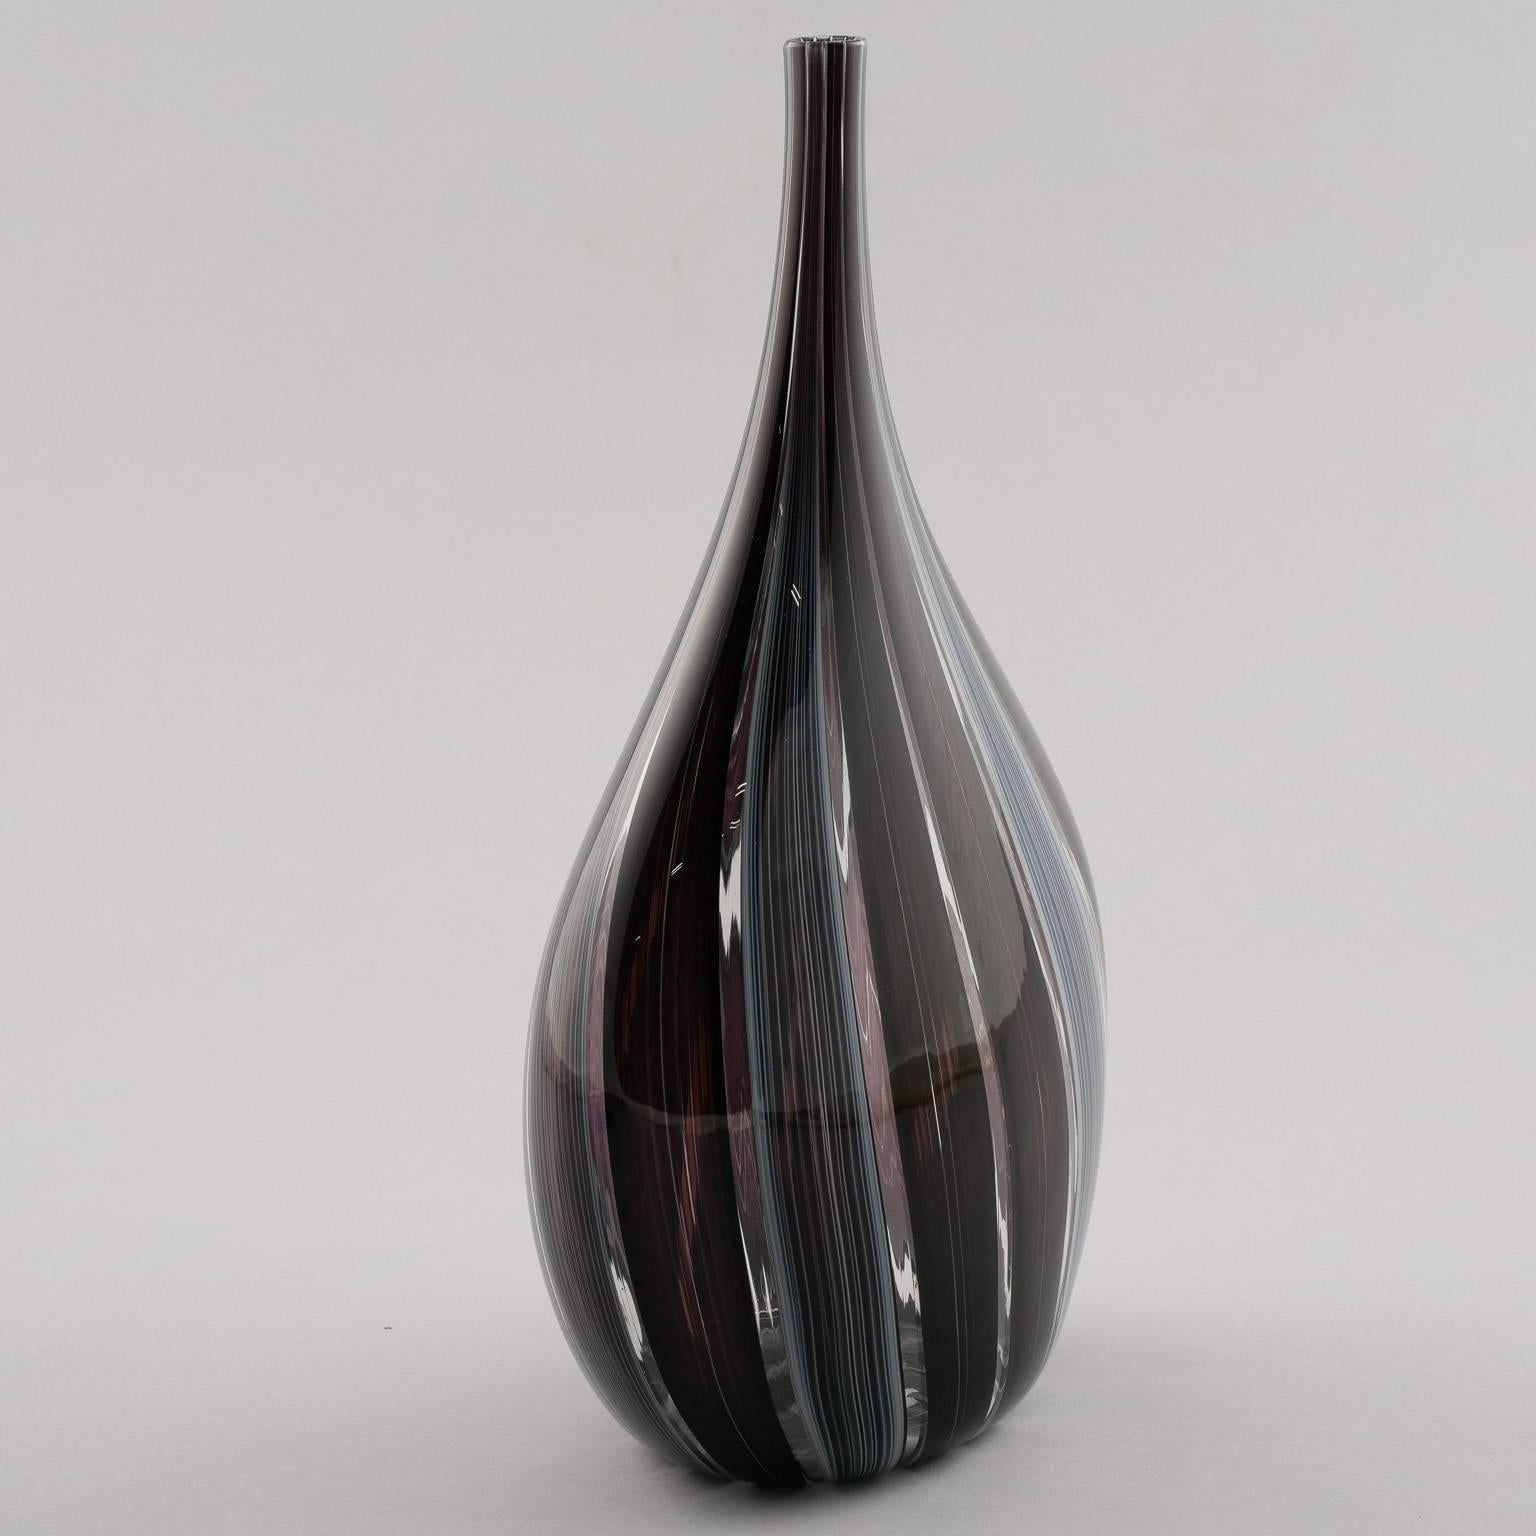 Murano art glass vase signed by artist Adriano dalla Valentina, circa 1980s. Vase is just under 12” tall with deep aubergine and slate blue colored vertical bands terminating in a very narrow neck. Excellent vintage condition.